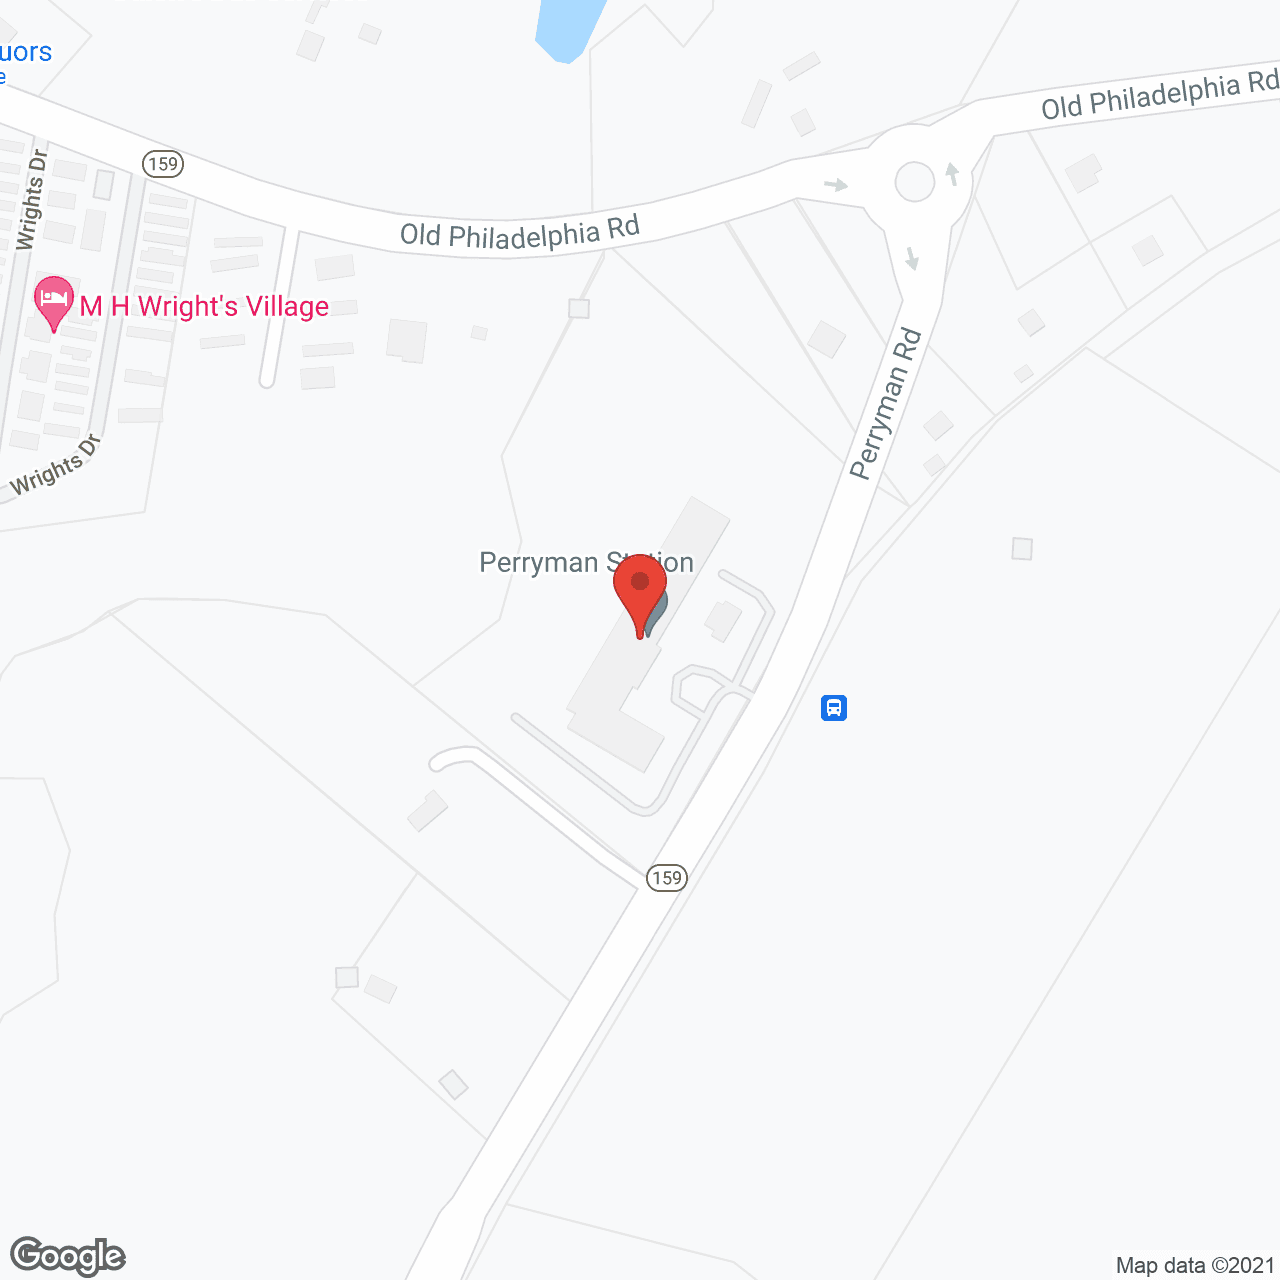 Perryman Station in google map